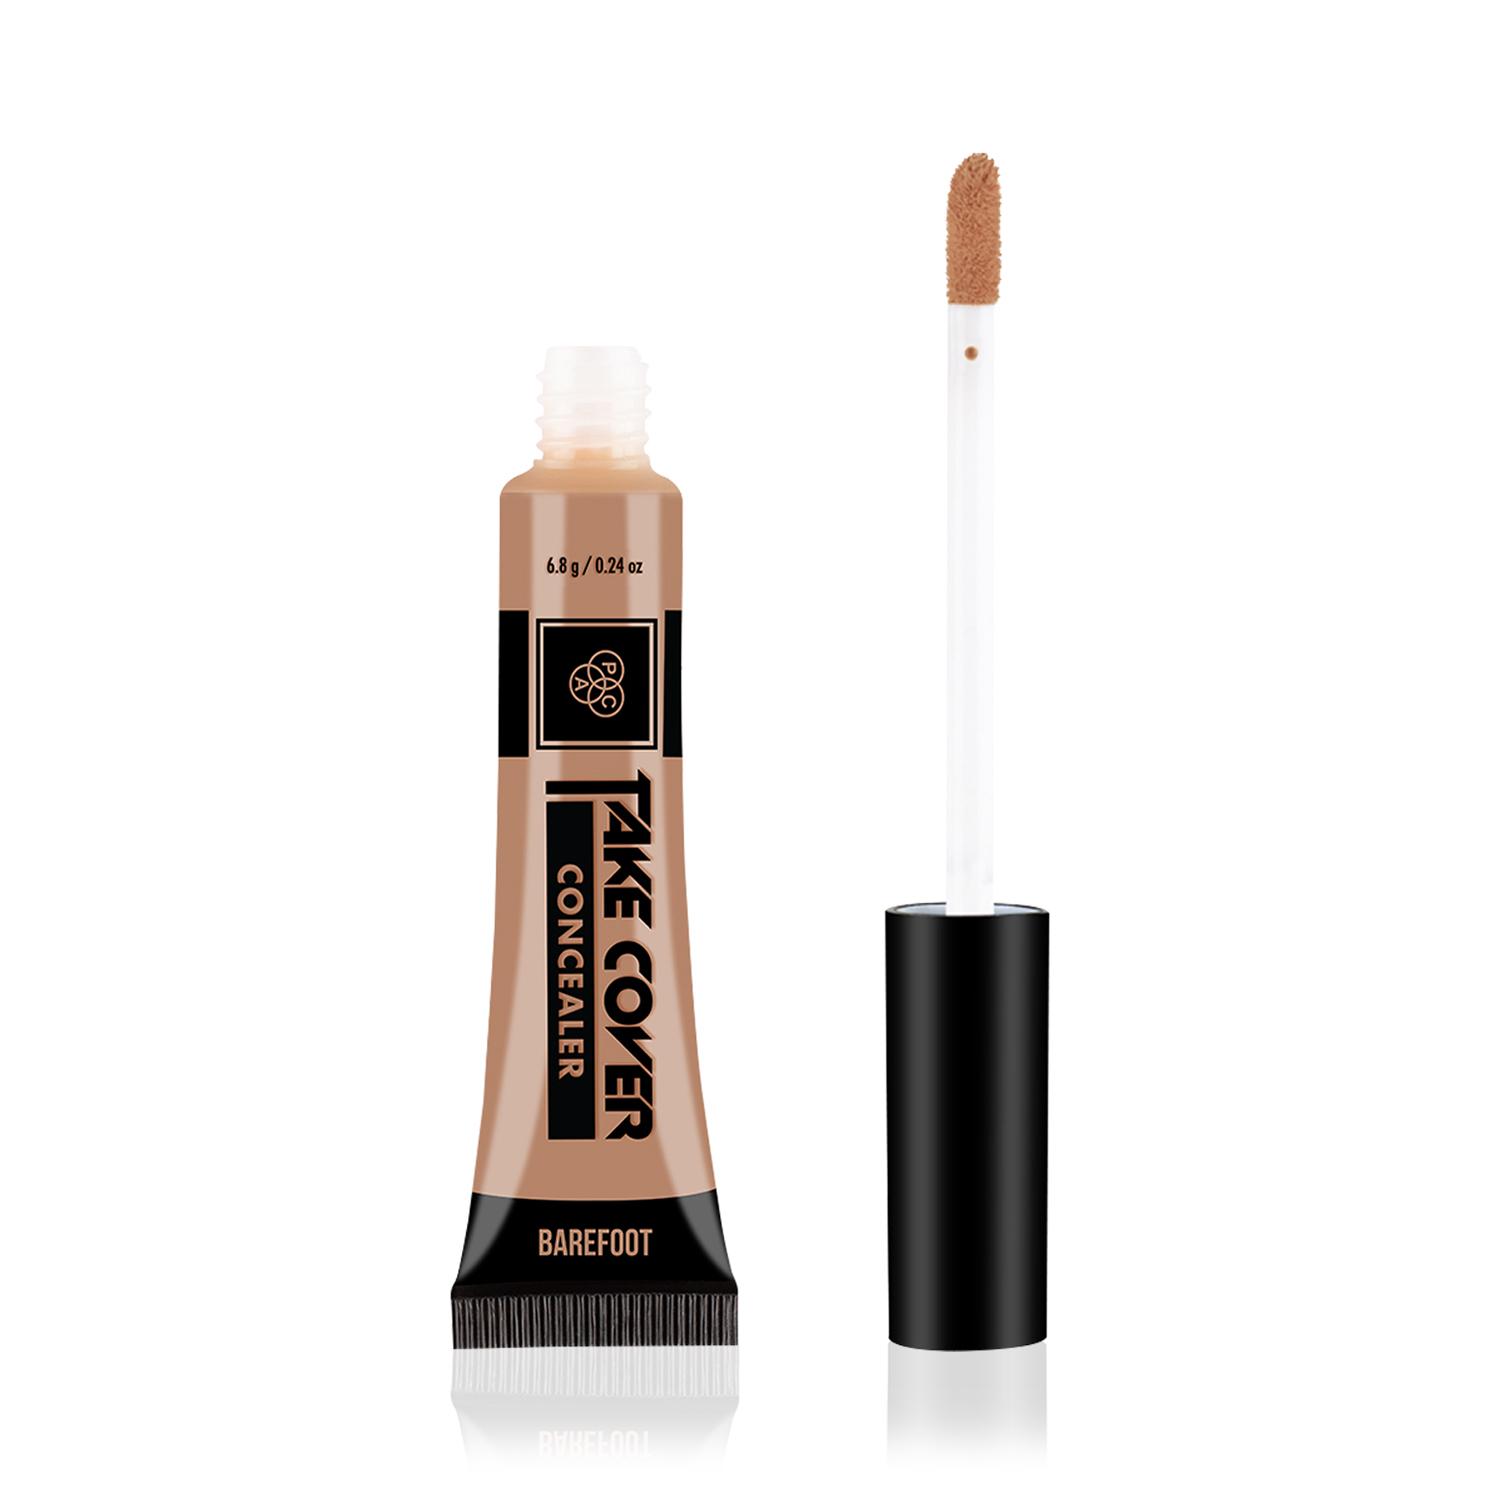 PAC | PAC Take Cover Concealer - 02 Barefoot (6.8g)